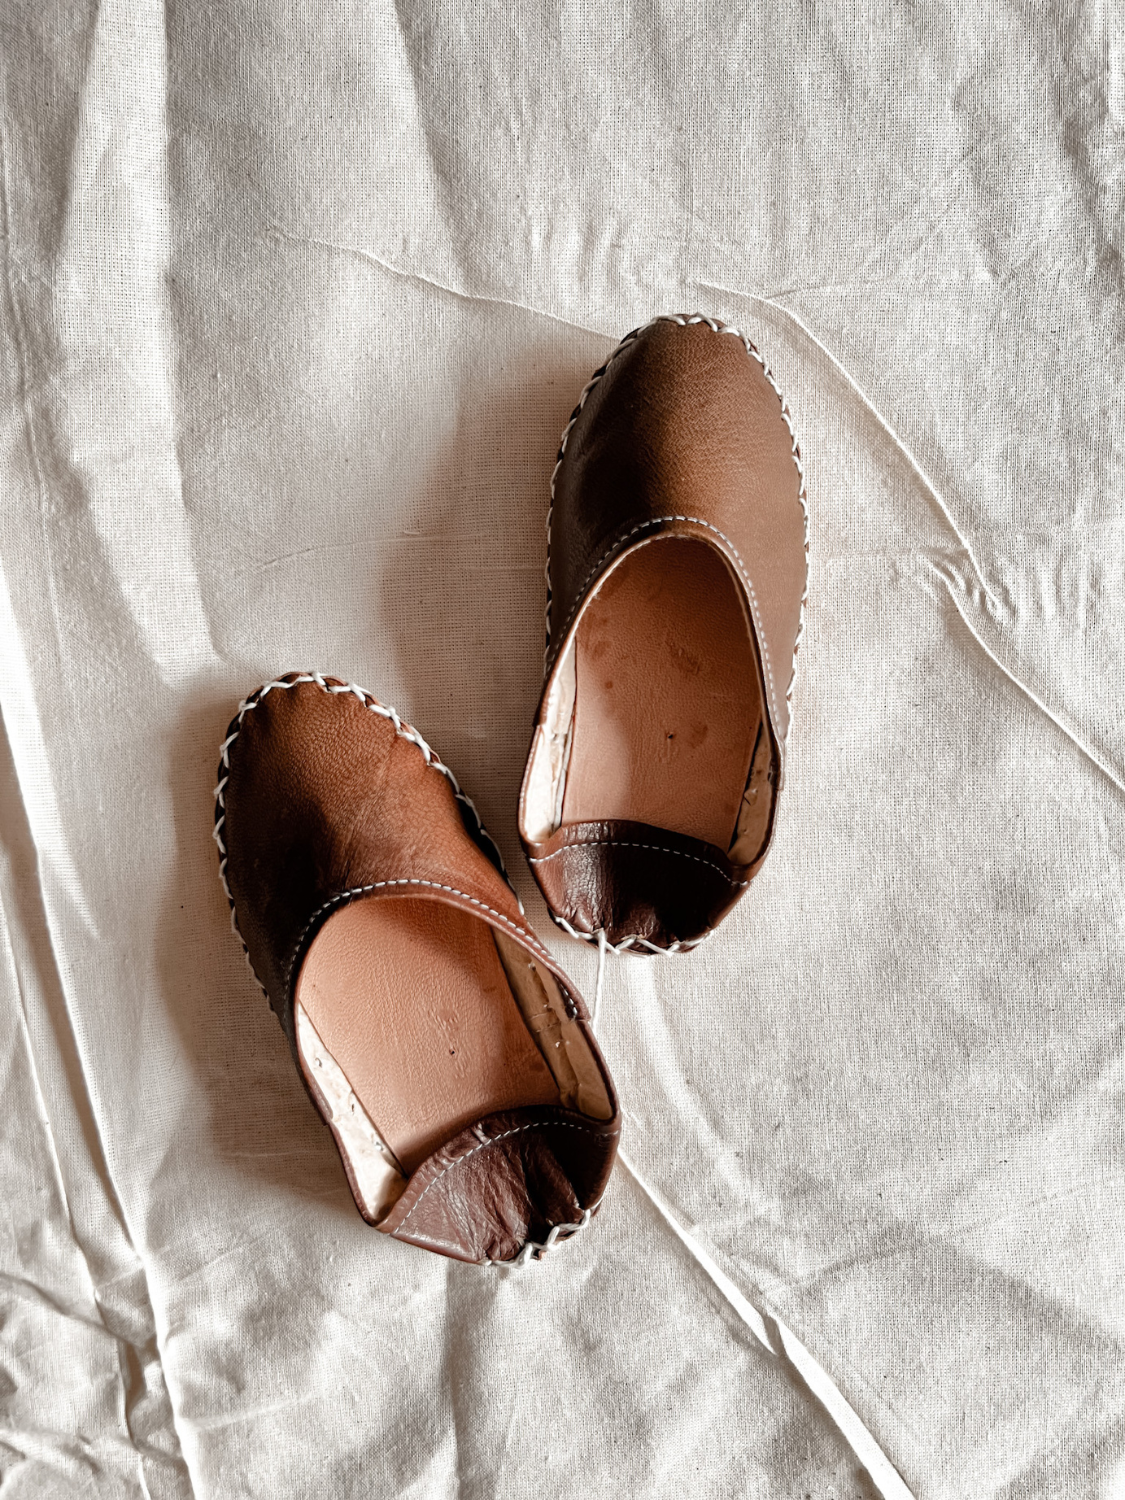 Kids Hand-Sewn Imported Egyptian Leather Shoes